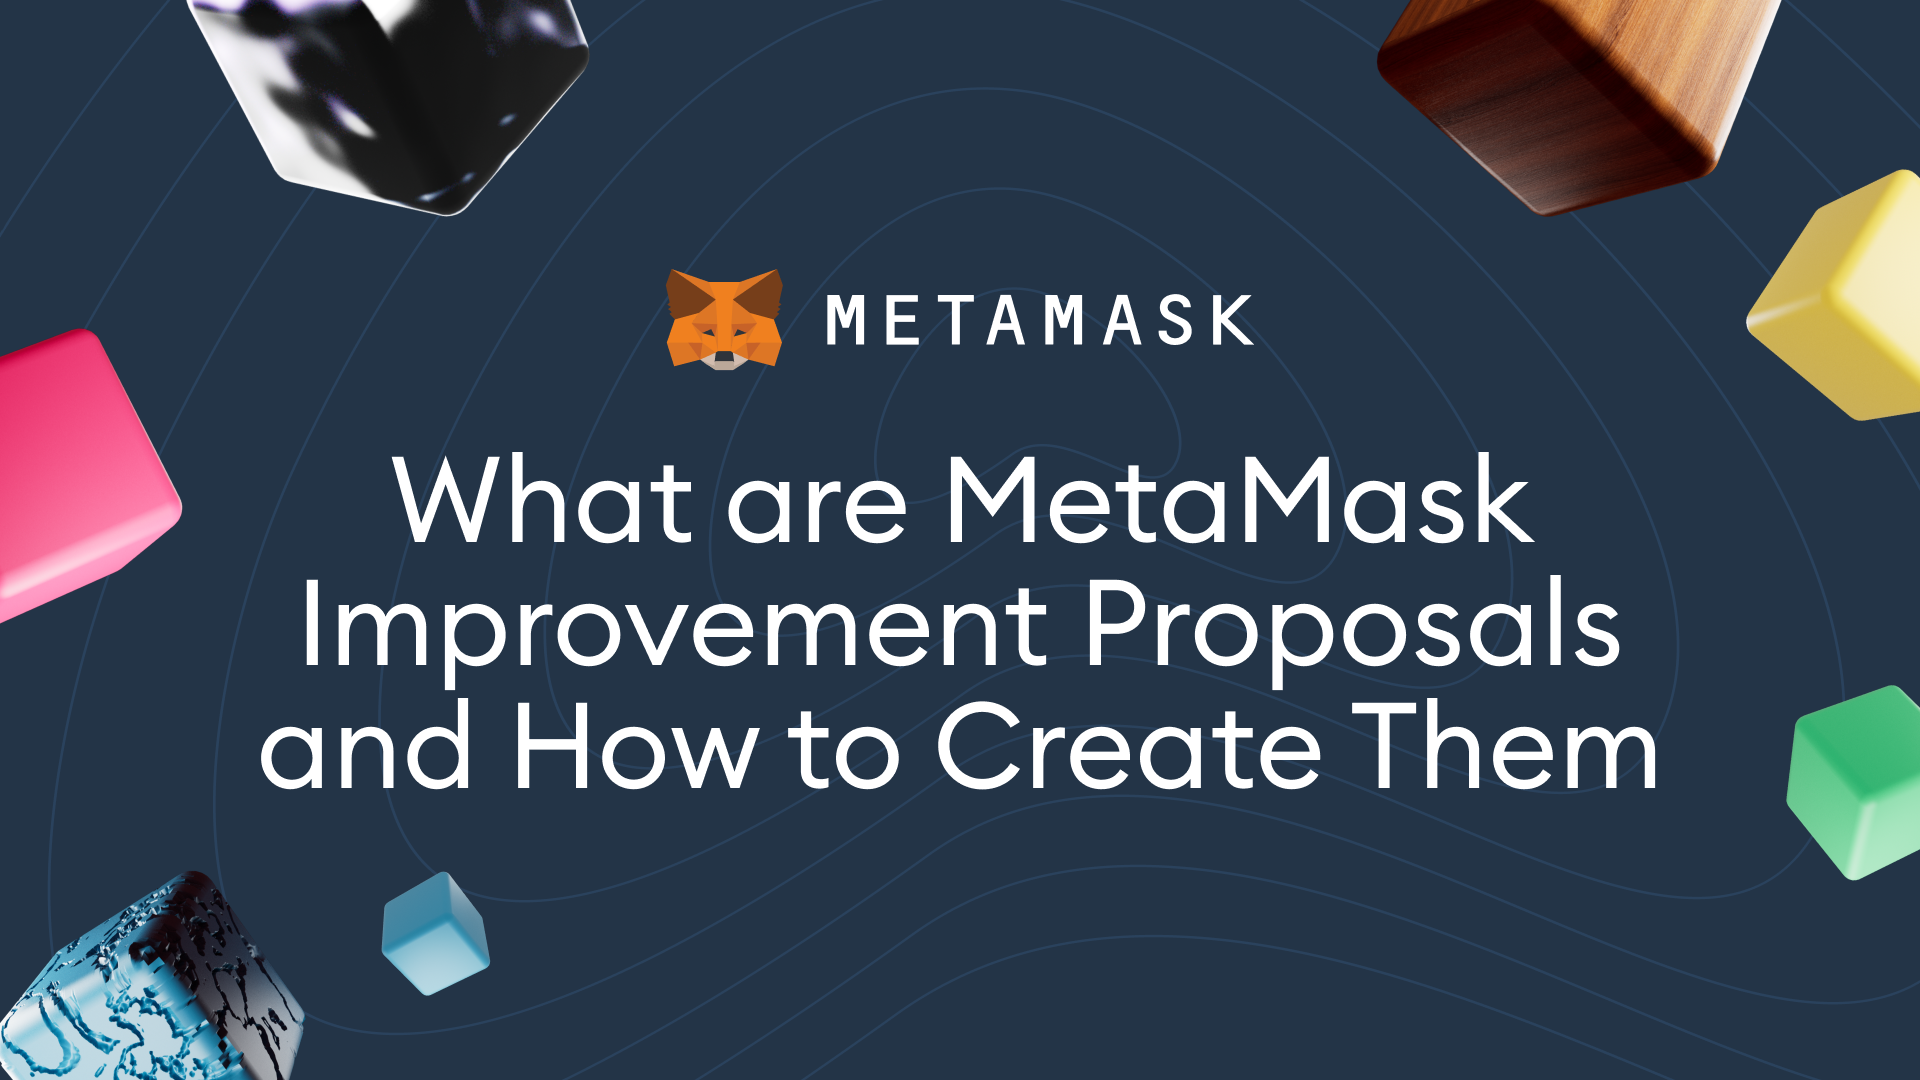 What are MetaMask Improvement Proposals and How to Create Them Image